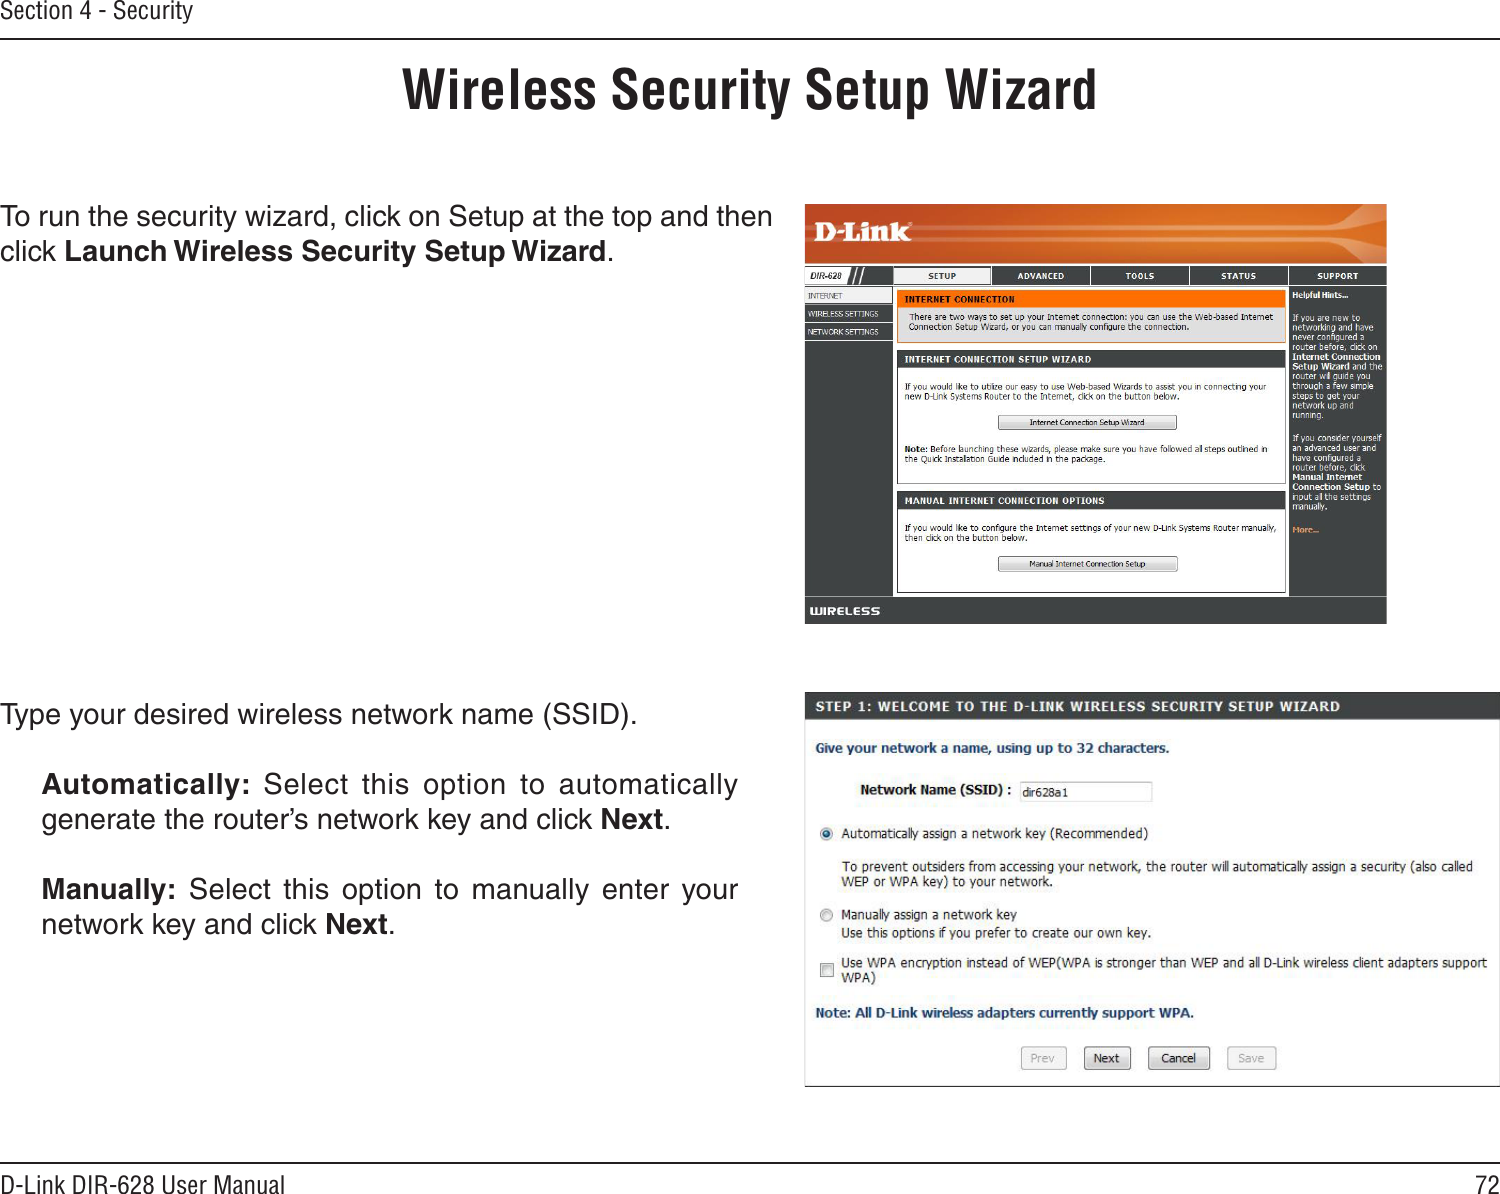 72D-Link DIR-628 User ManualSection 4 - SecurityWireless Security Setup WizardTo run the security wizard, click on Setup at the top and then click Launch Wireless Security Setup Wizard.Type your desired wireless network name (SSID). Automatically:  Select  this  option  to  automatically generate the router’s network key and click Next.Manually:  Select  this  option  to  manually  enter  your network key and click Next.